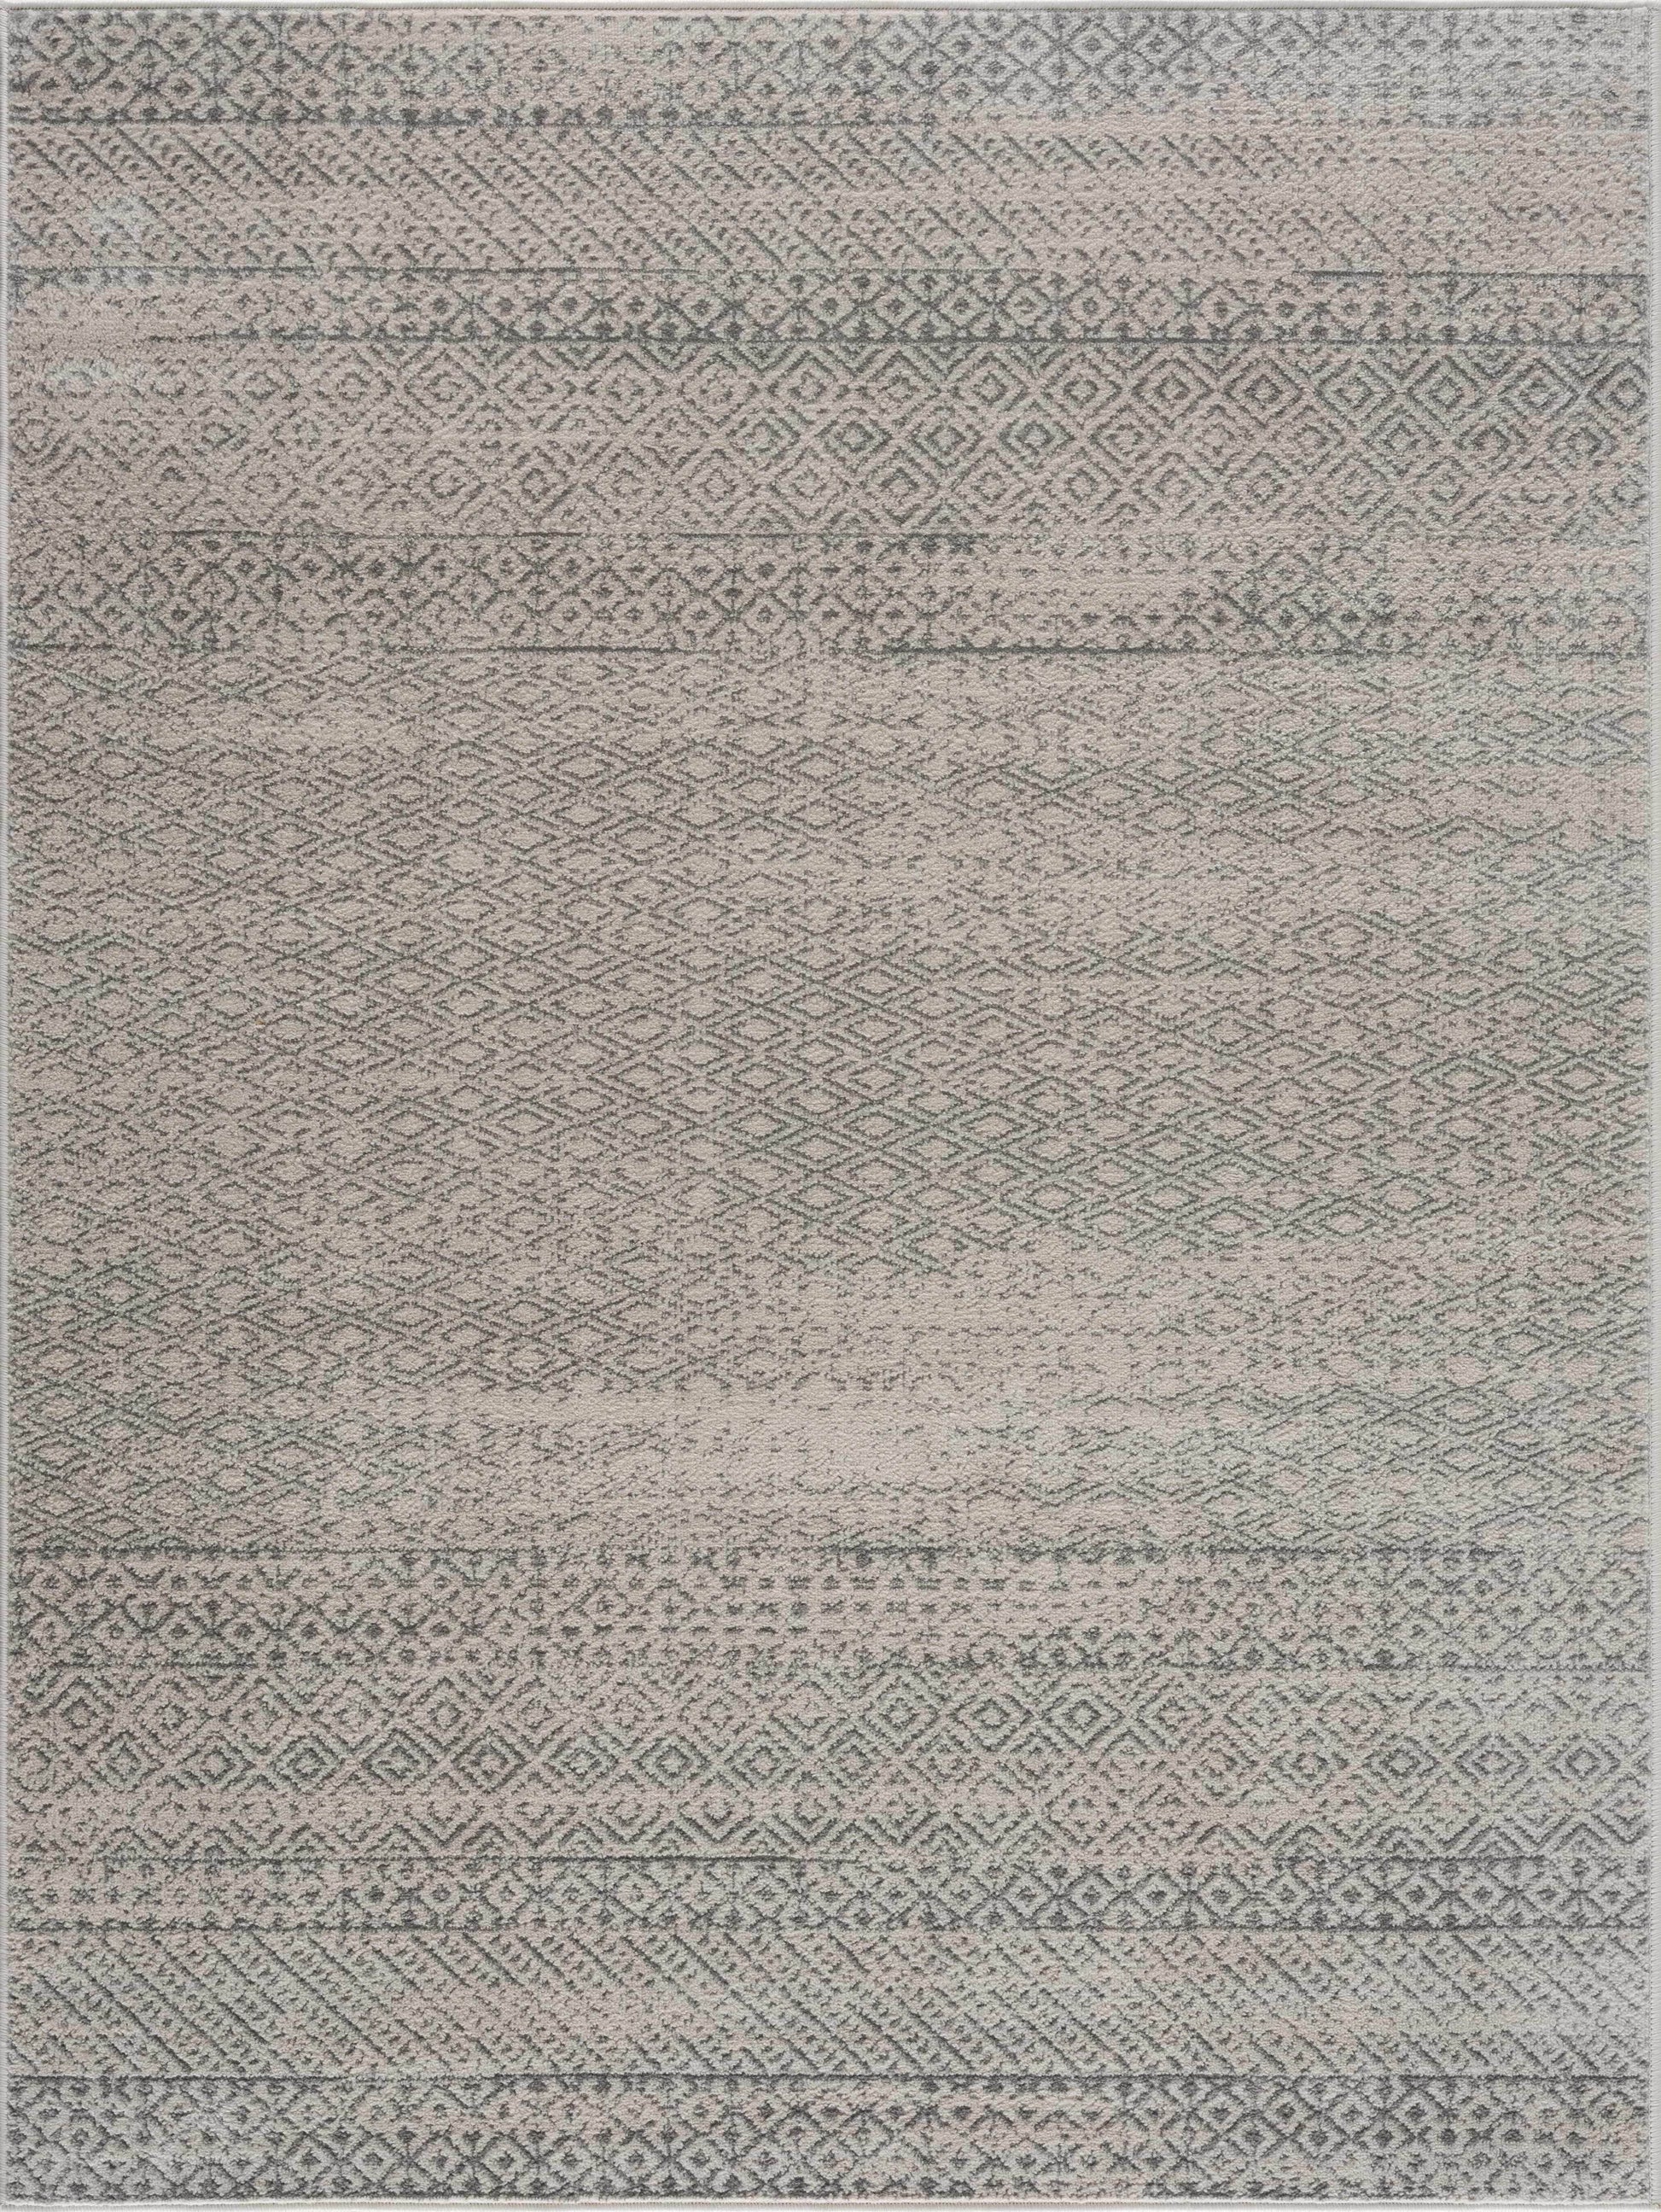 Boutique Rugs Rugs Tigri Aztec Ivory & Gray 2317 Area Rug